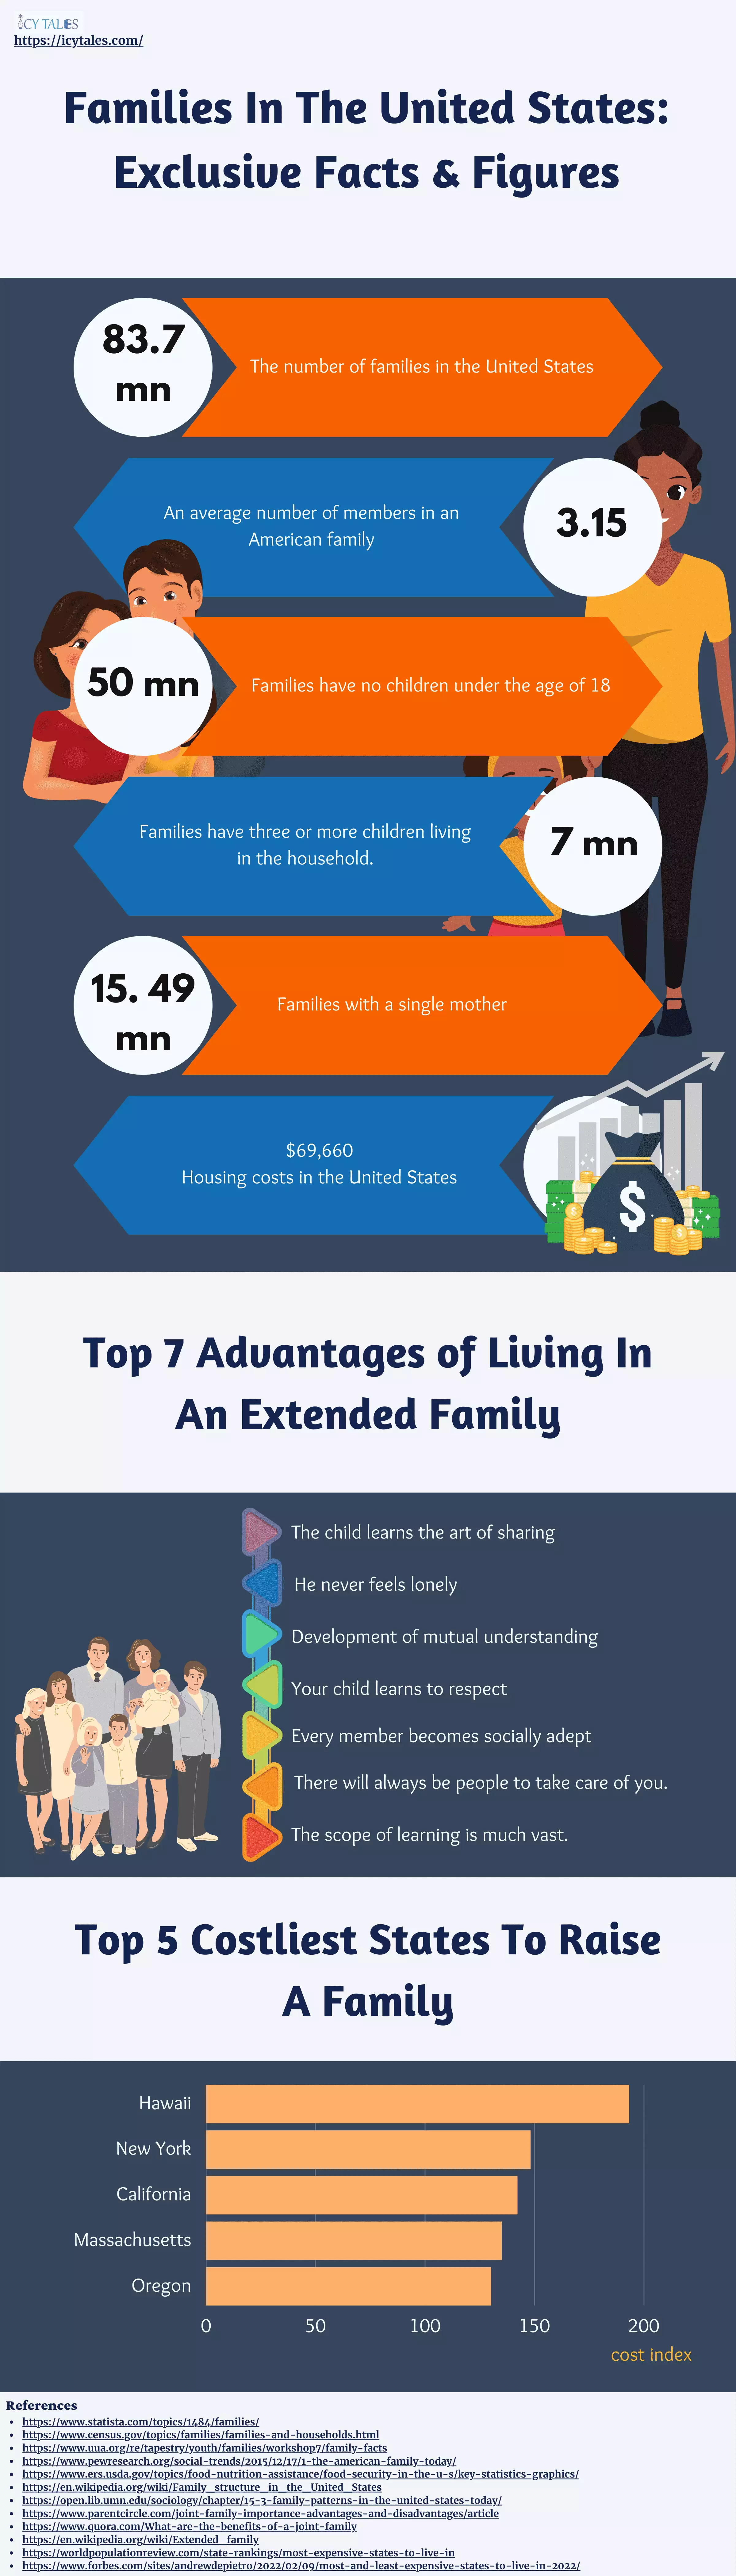 Families In The United States Exclusive Facts & Figures